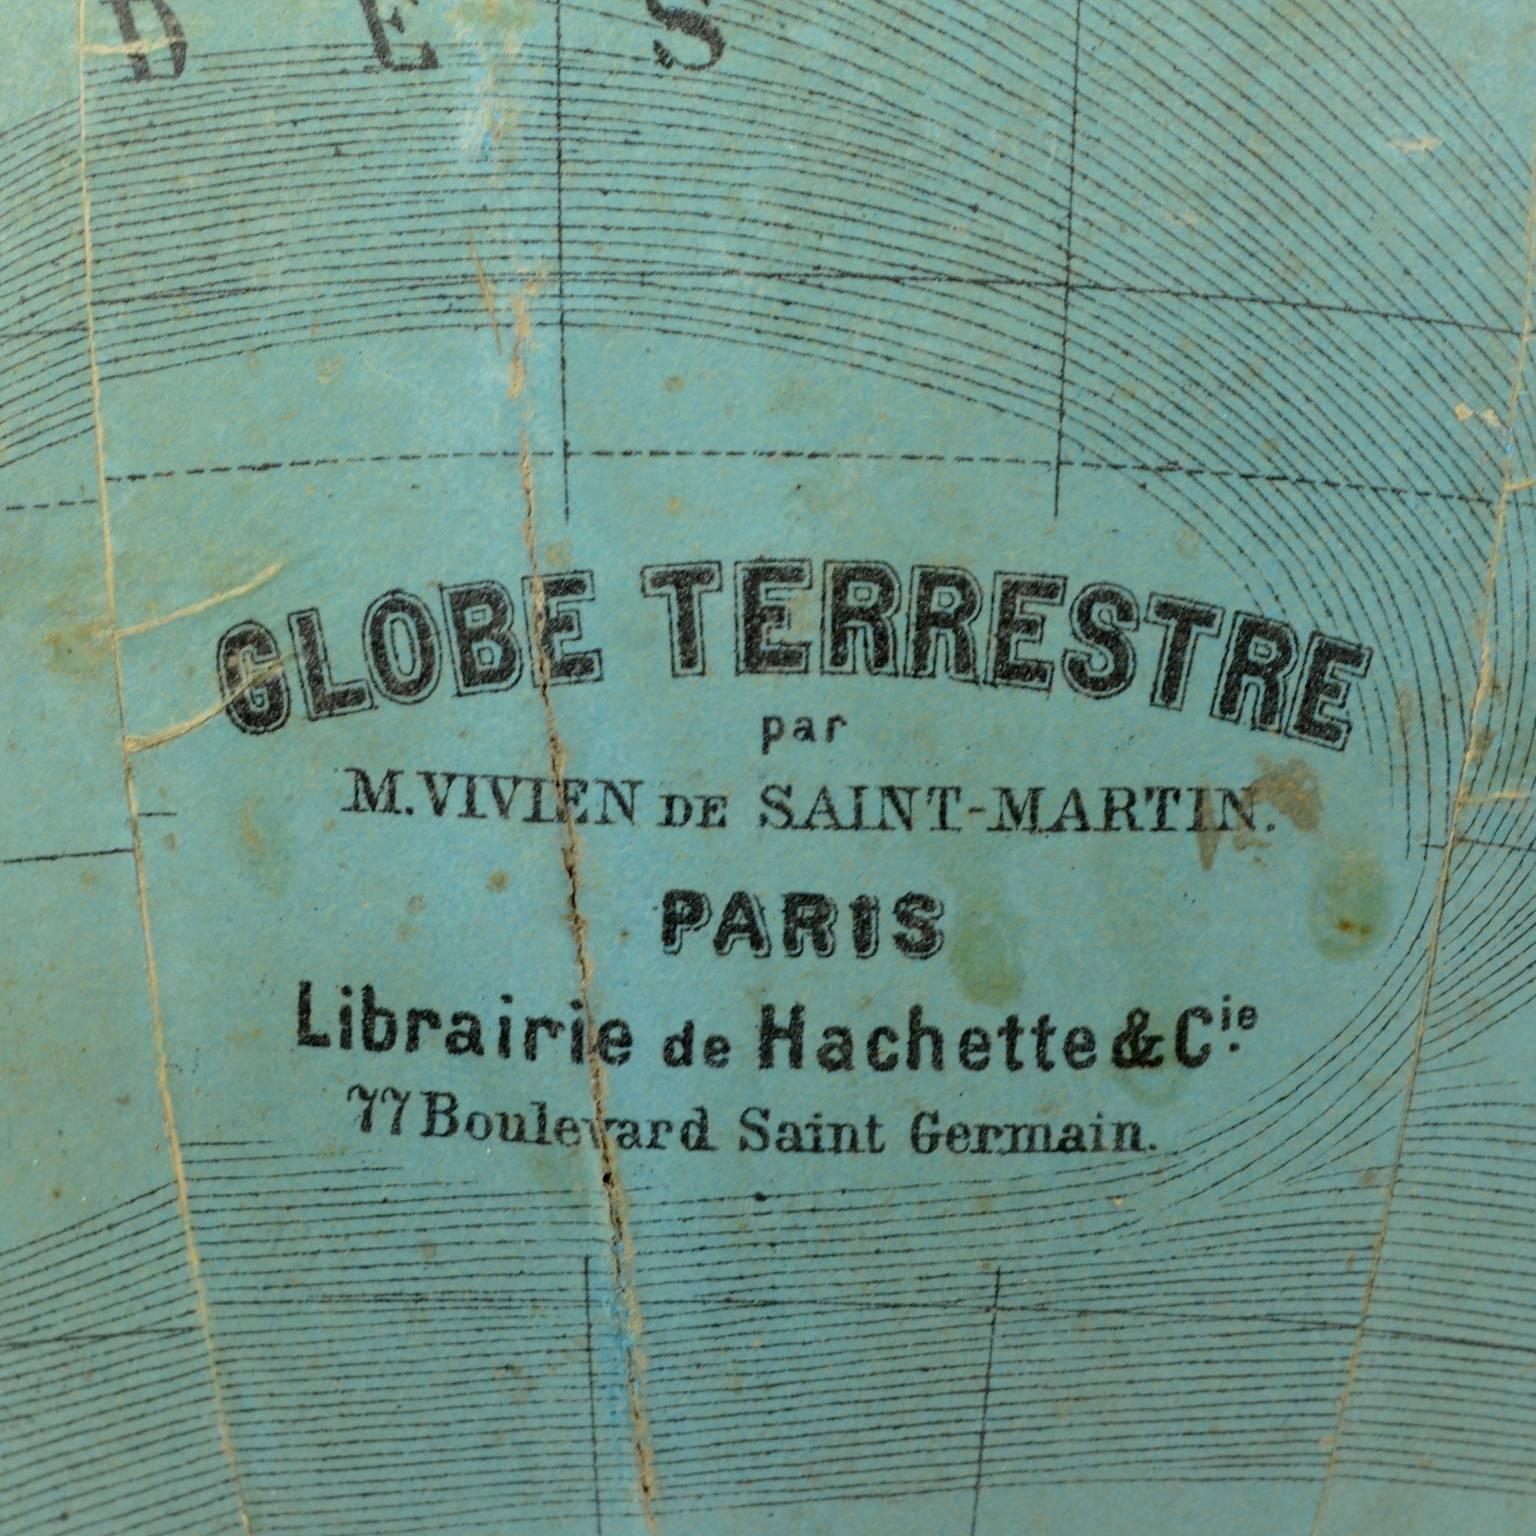 Antique Terrestrial Globe Edited in the Second Half of the 19th Century 2